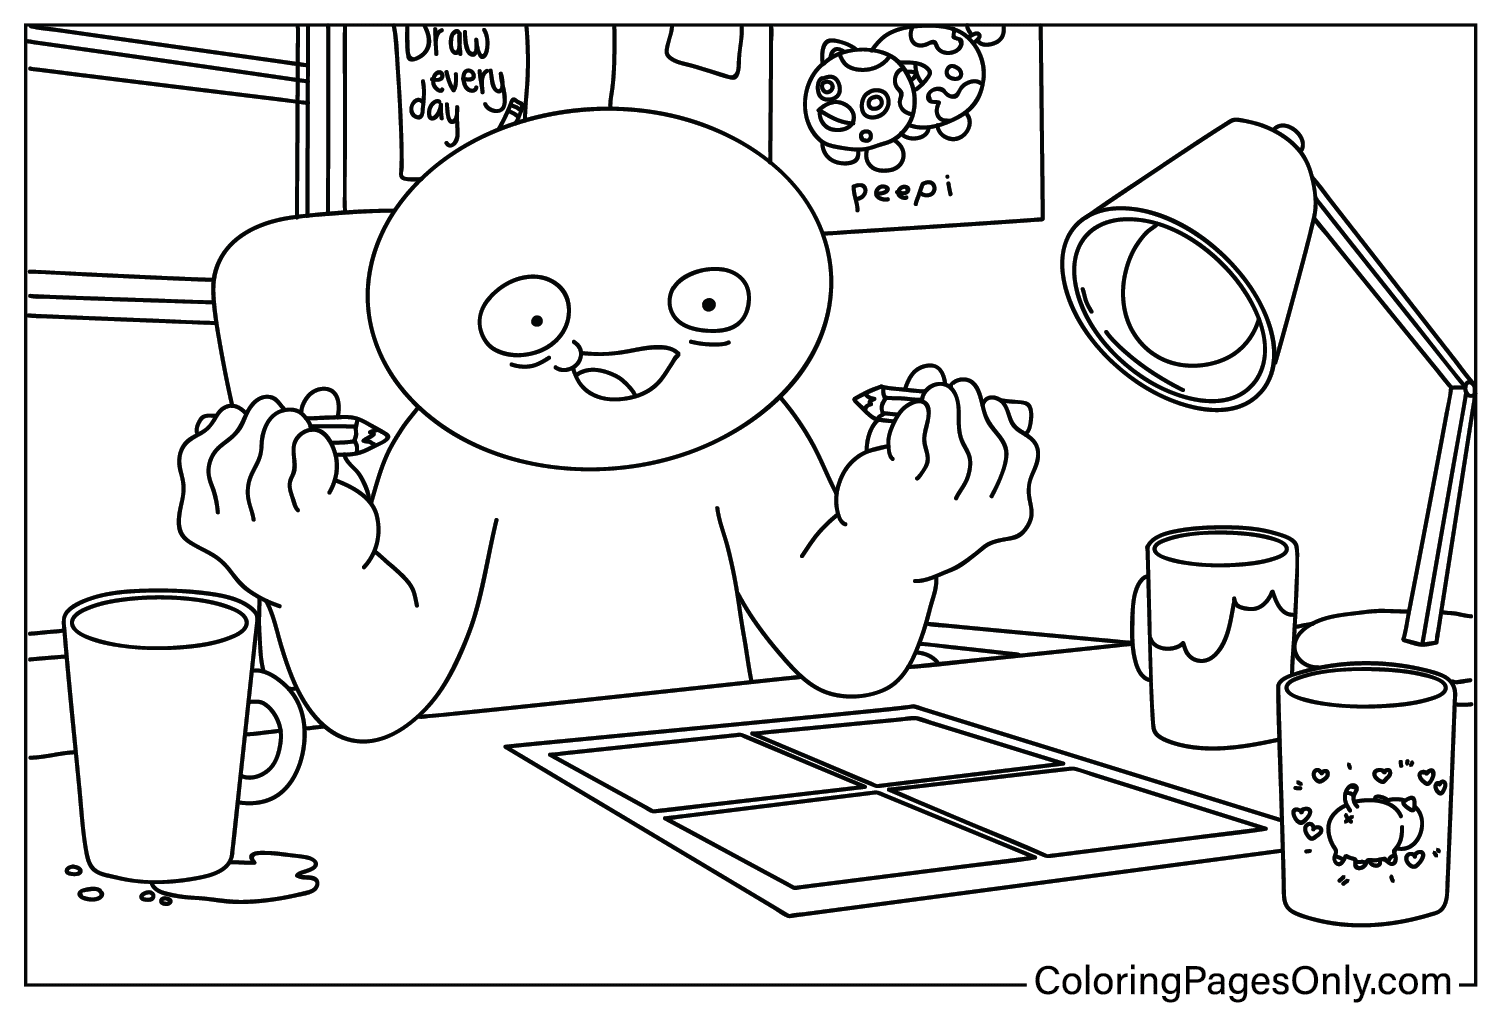 TheOdd1sOut Coloring Pages to Printable from TheOdd1sOut